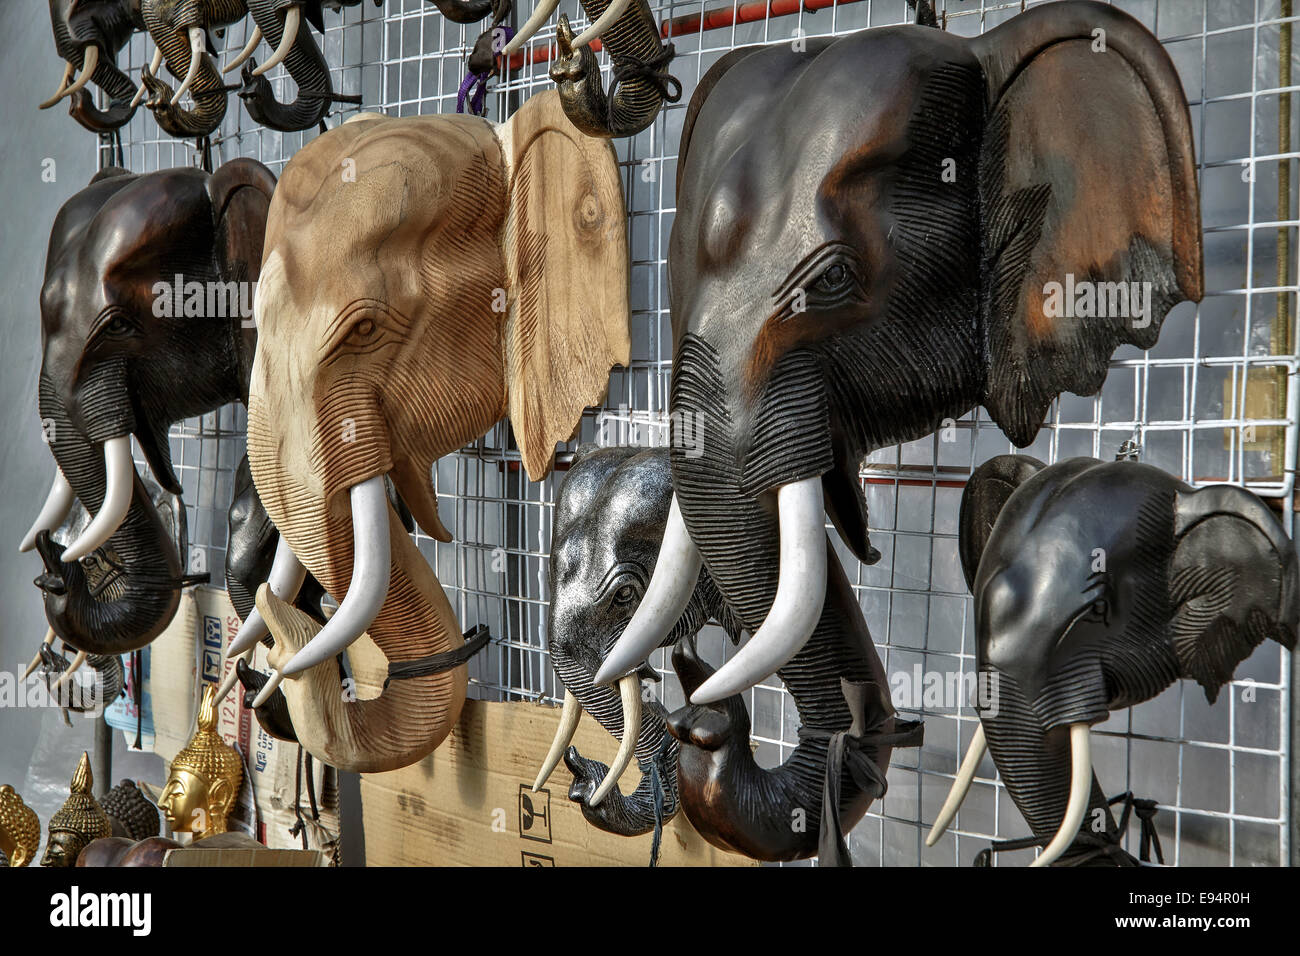 Intricately carved wooden elephant heads for sale on a Thai market stall. Thailand S. E. Asia Stock Photo